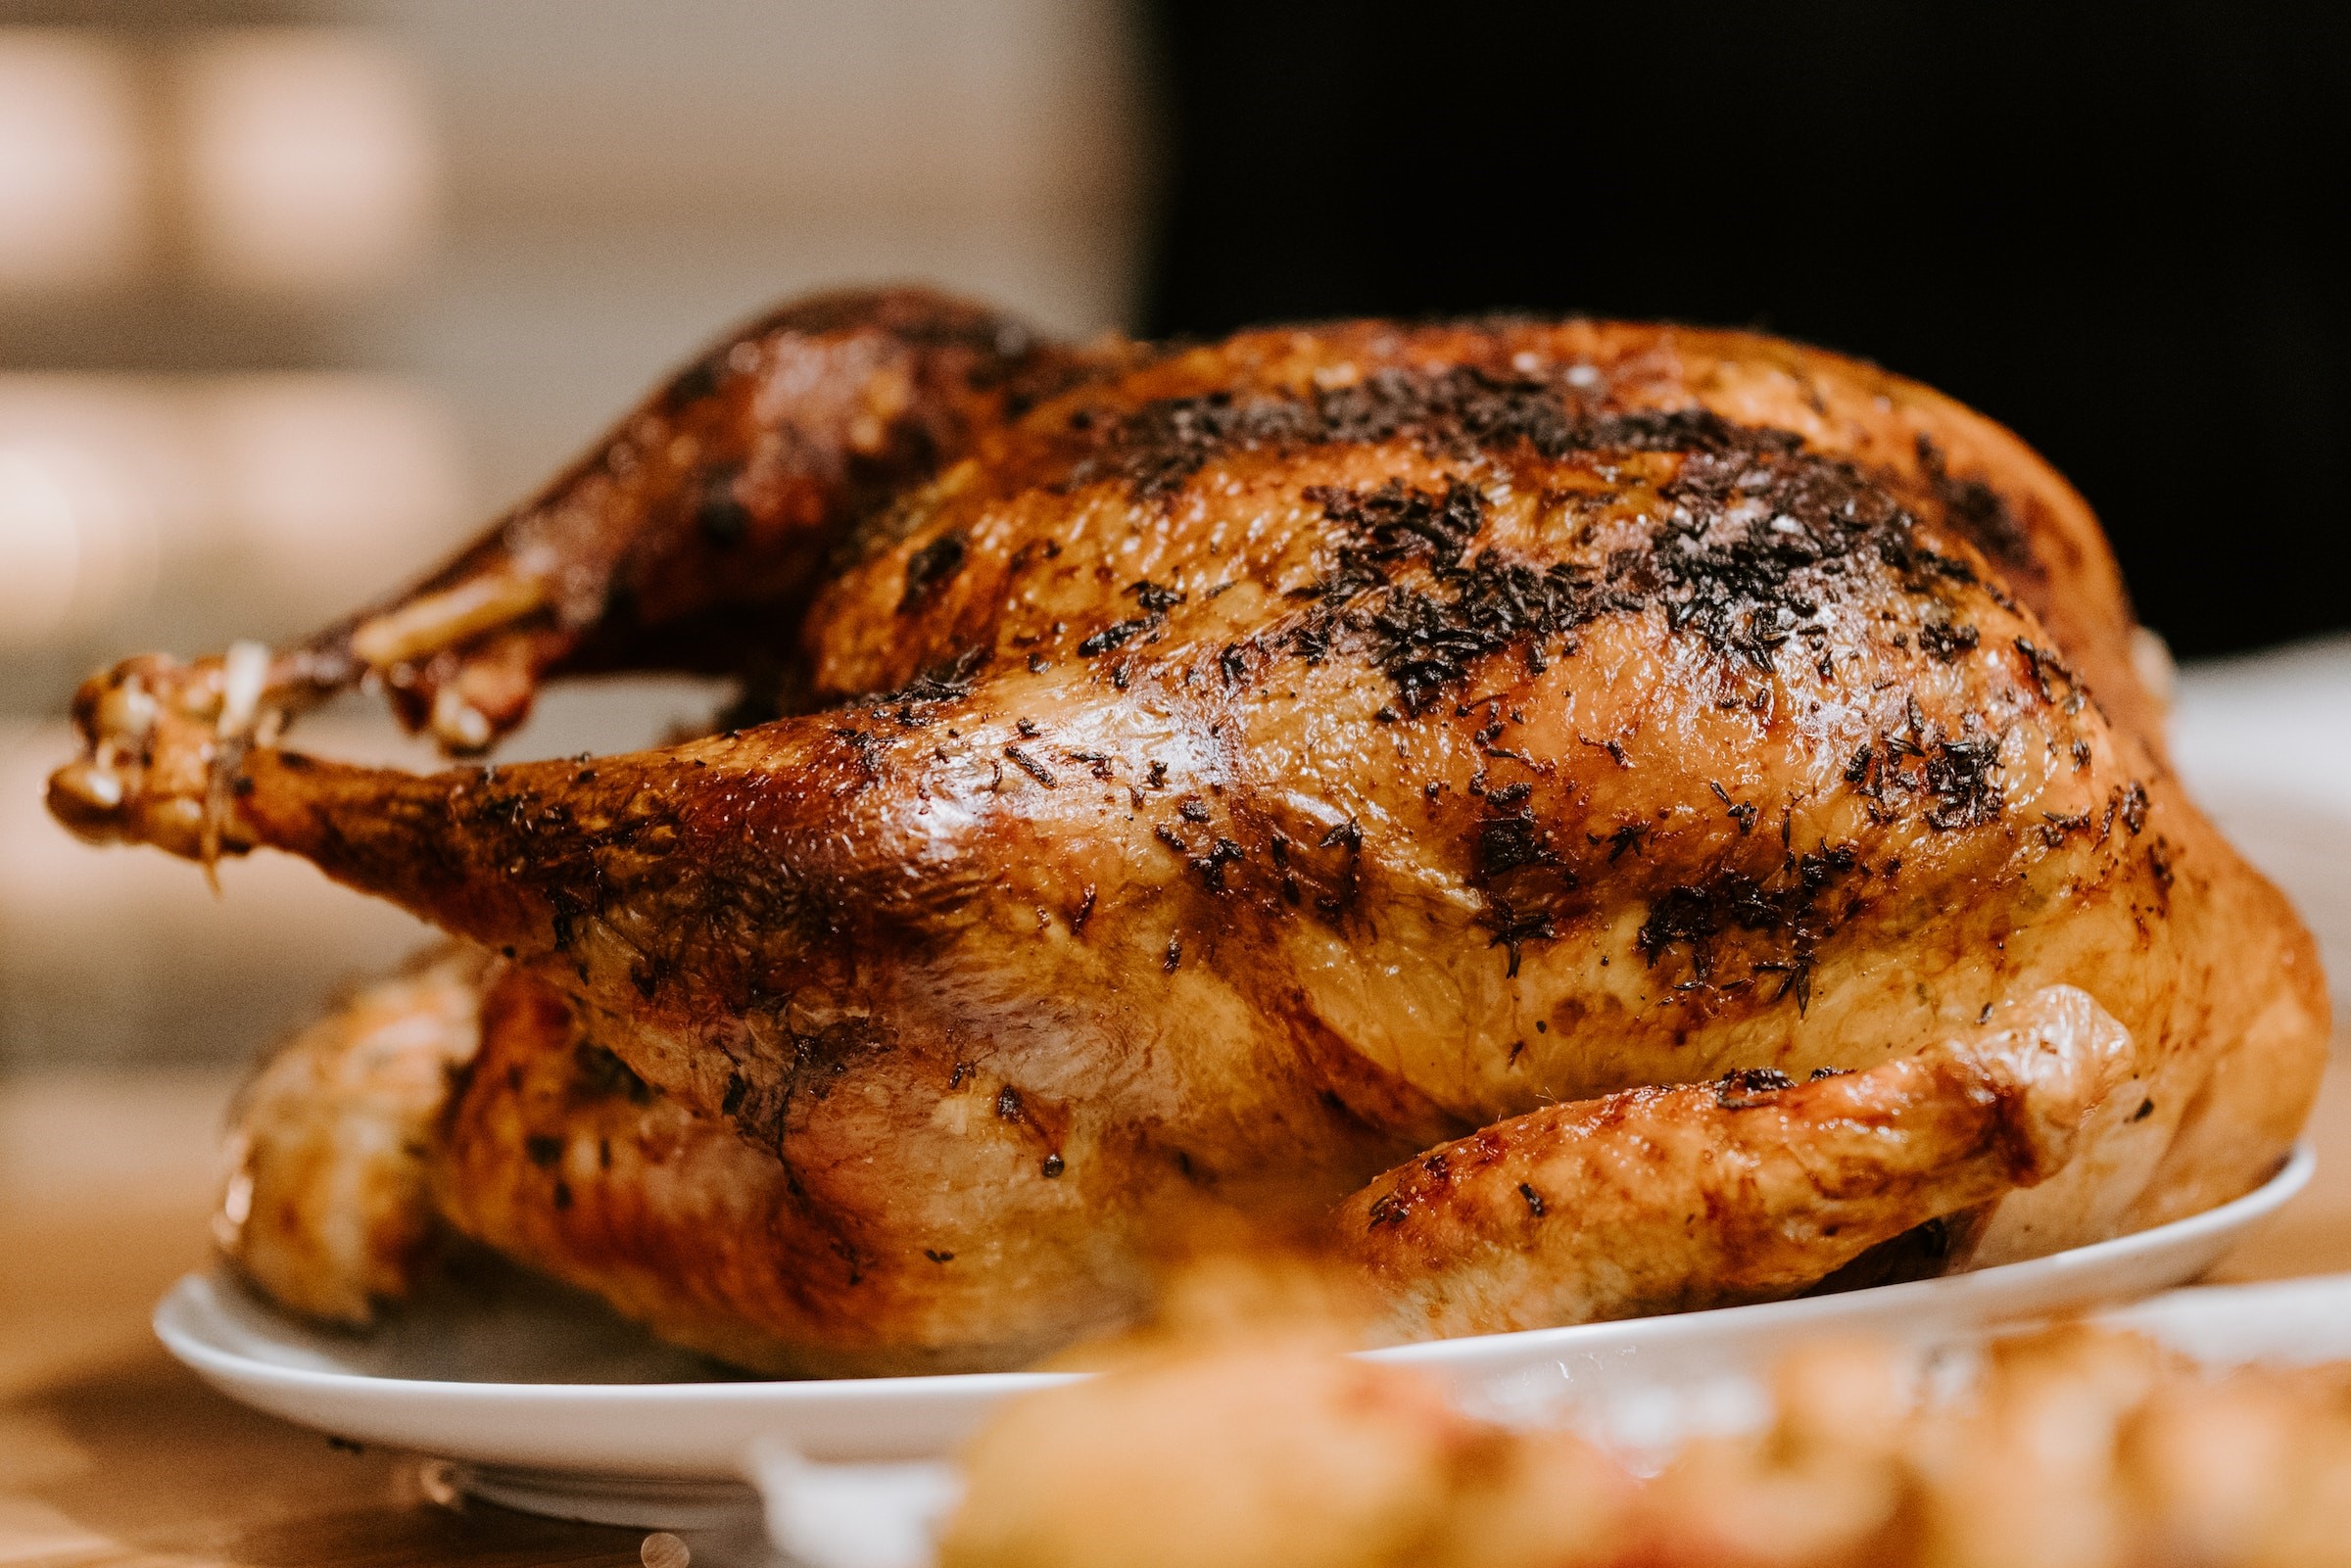 Why do we eat Turkey on Thanksgiving?